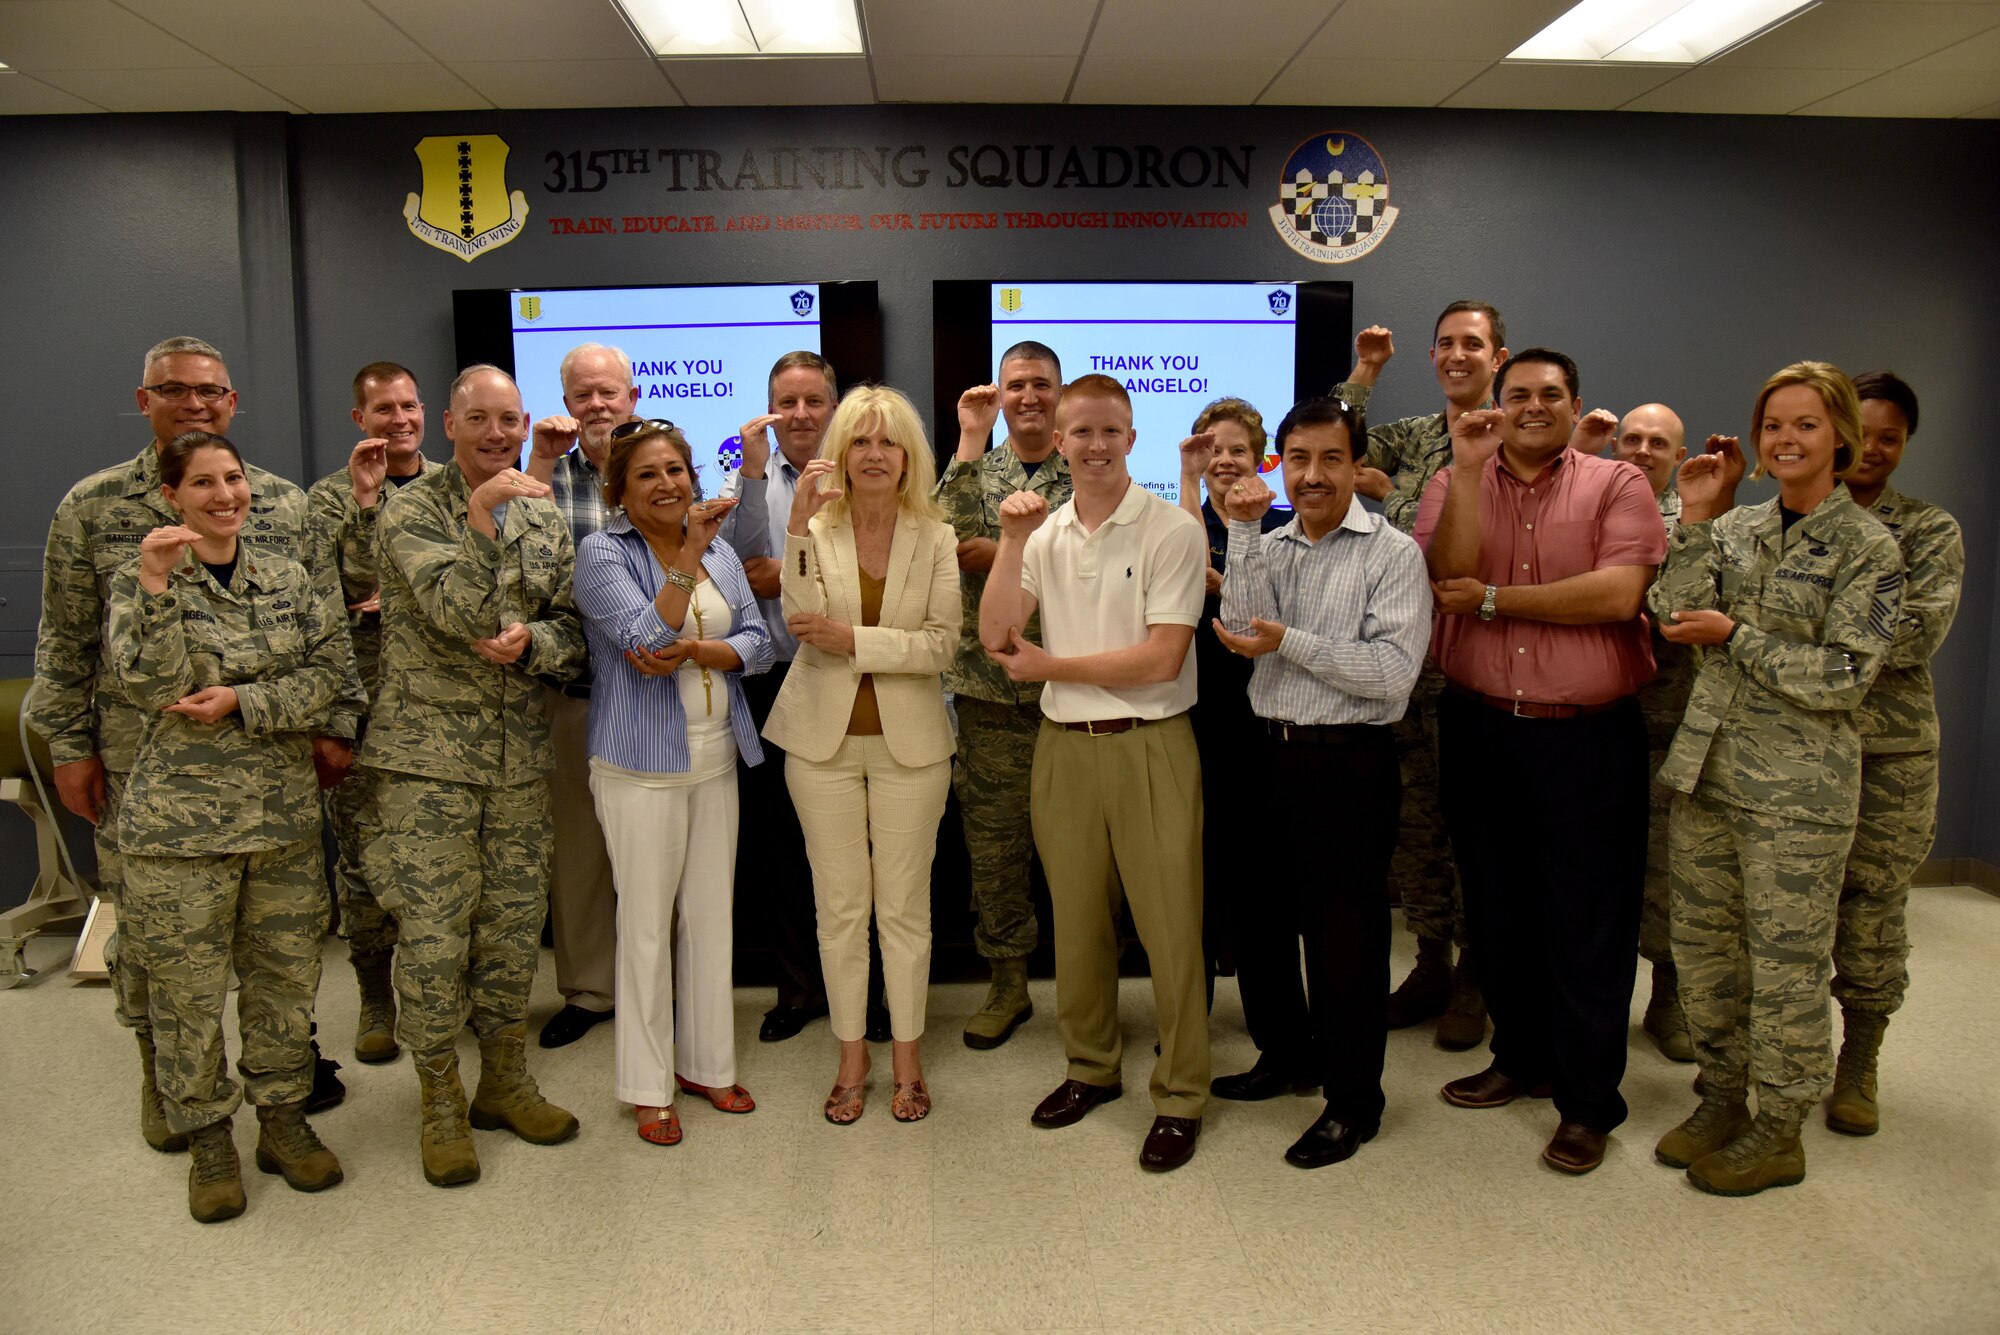 Goodfellow Air Force Base and San Angelo, Texas leaders pose for a photo while doing the 315th Training Squadron hand sign at the Di Tommaso Hall on Goodfellow Air Force Base, Texas, July 7, 2017. The group photo was the last event in a base orientation tour for new community leaders. (U.S. Air Force photo by Staff Sgt. Joshua Edwards/Released)